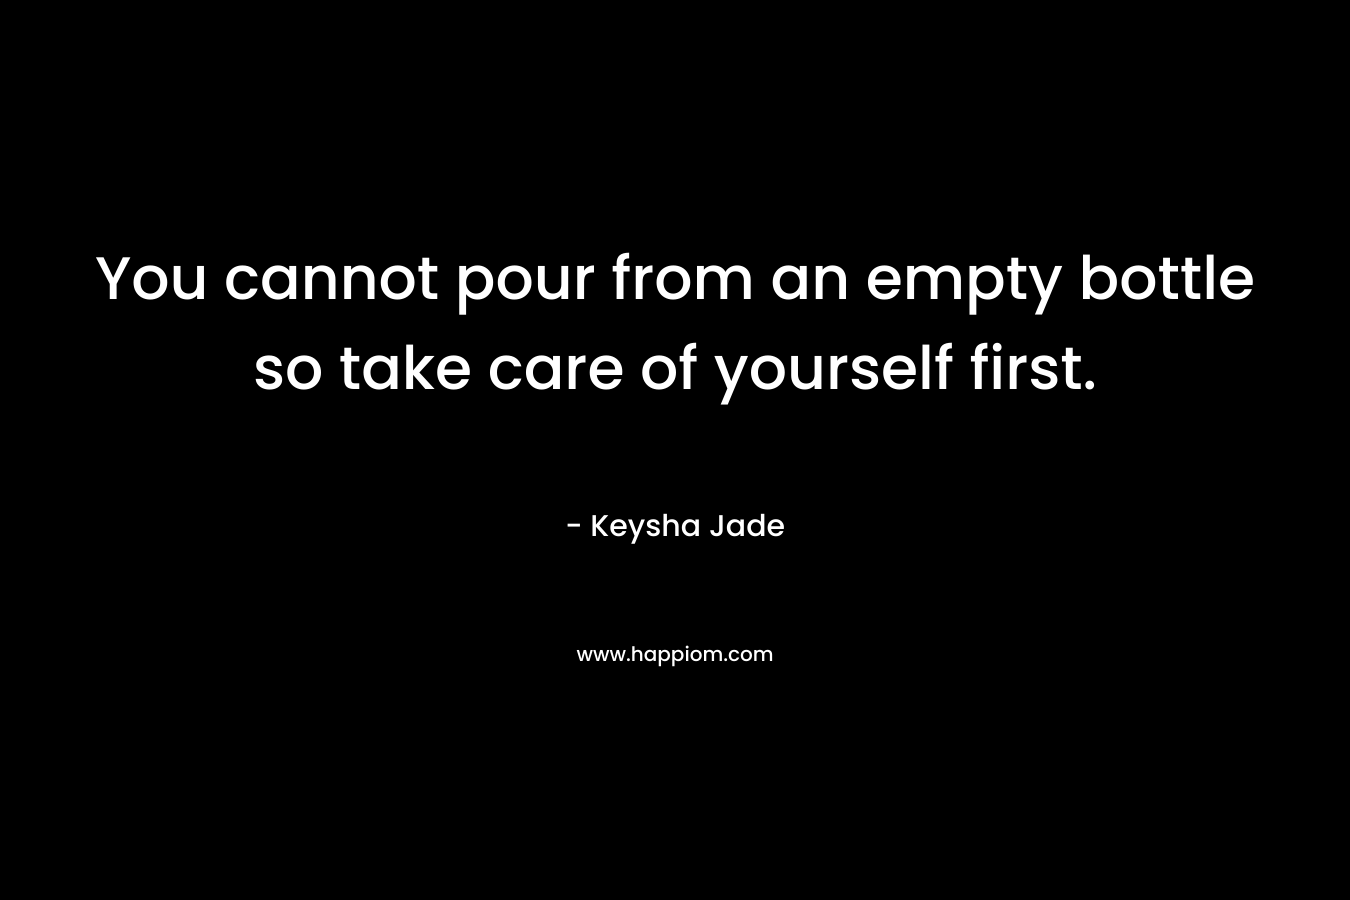 You cannot pour from an empty bottle so take care of yourself first.